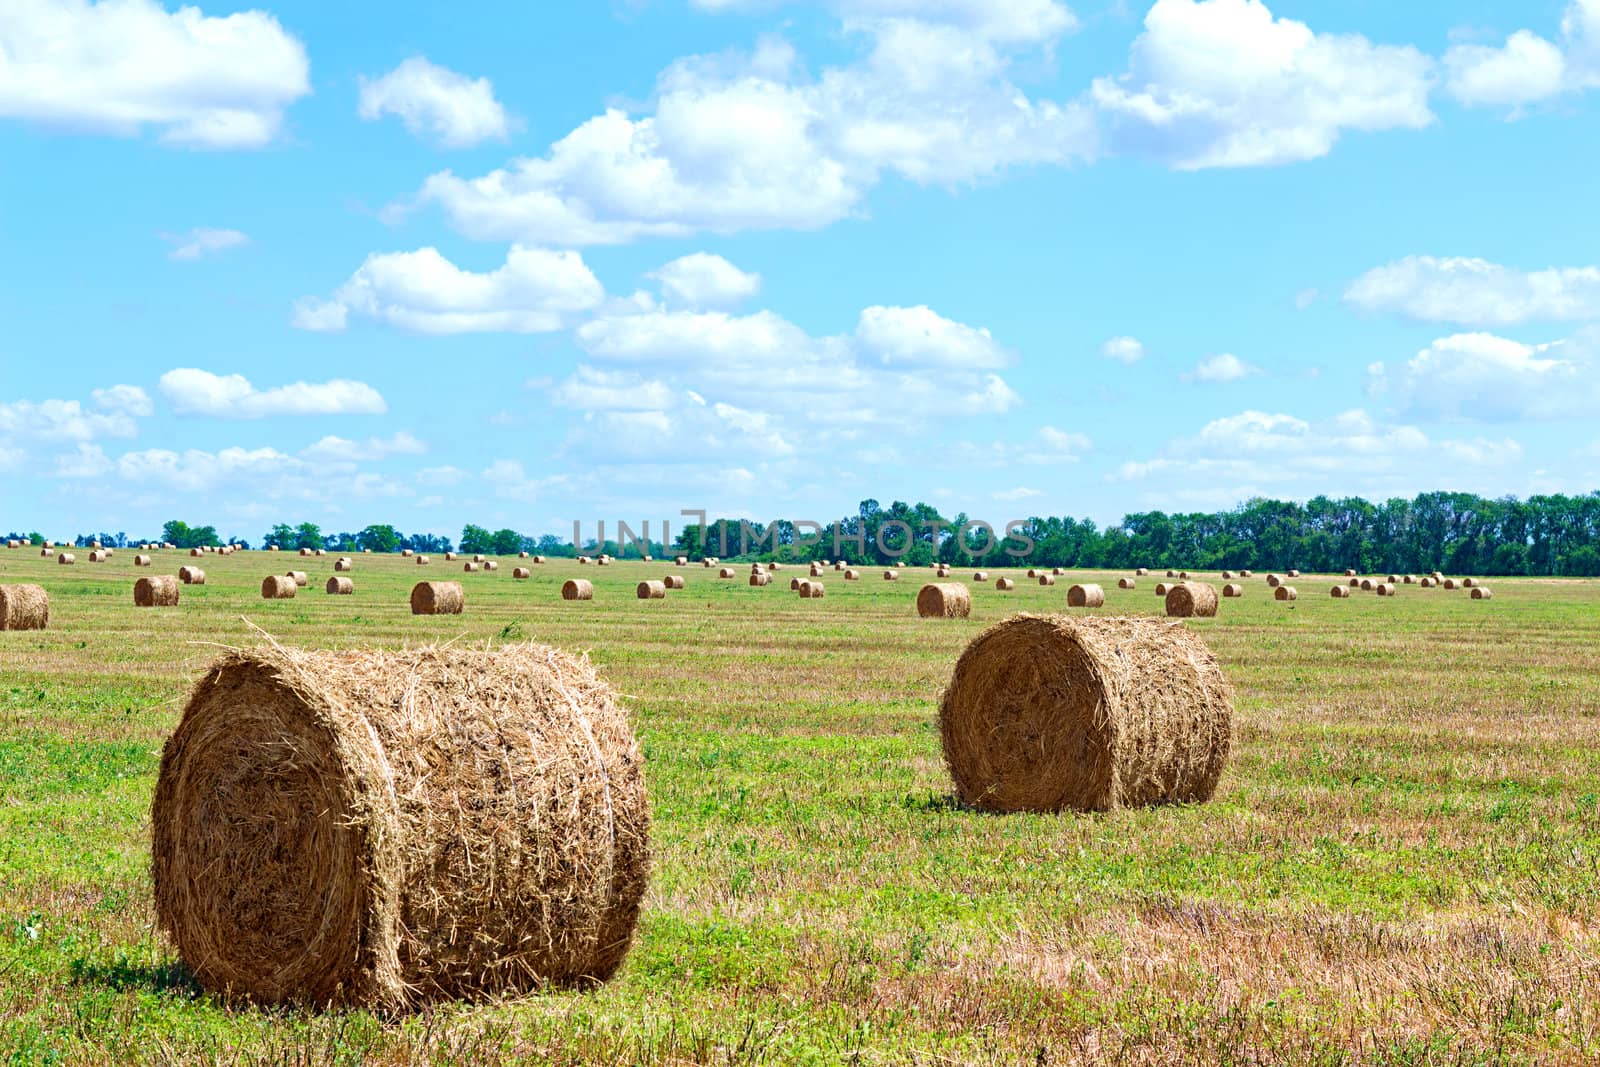 harvested bales of straw from the field by Plus69